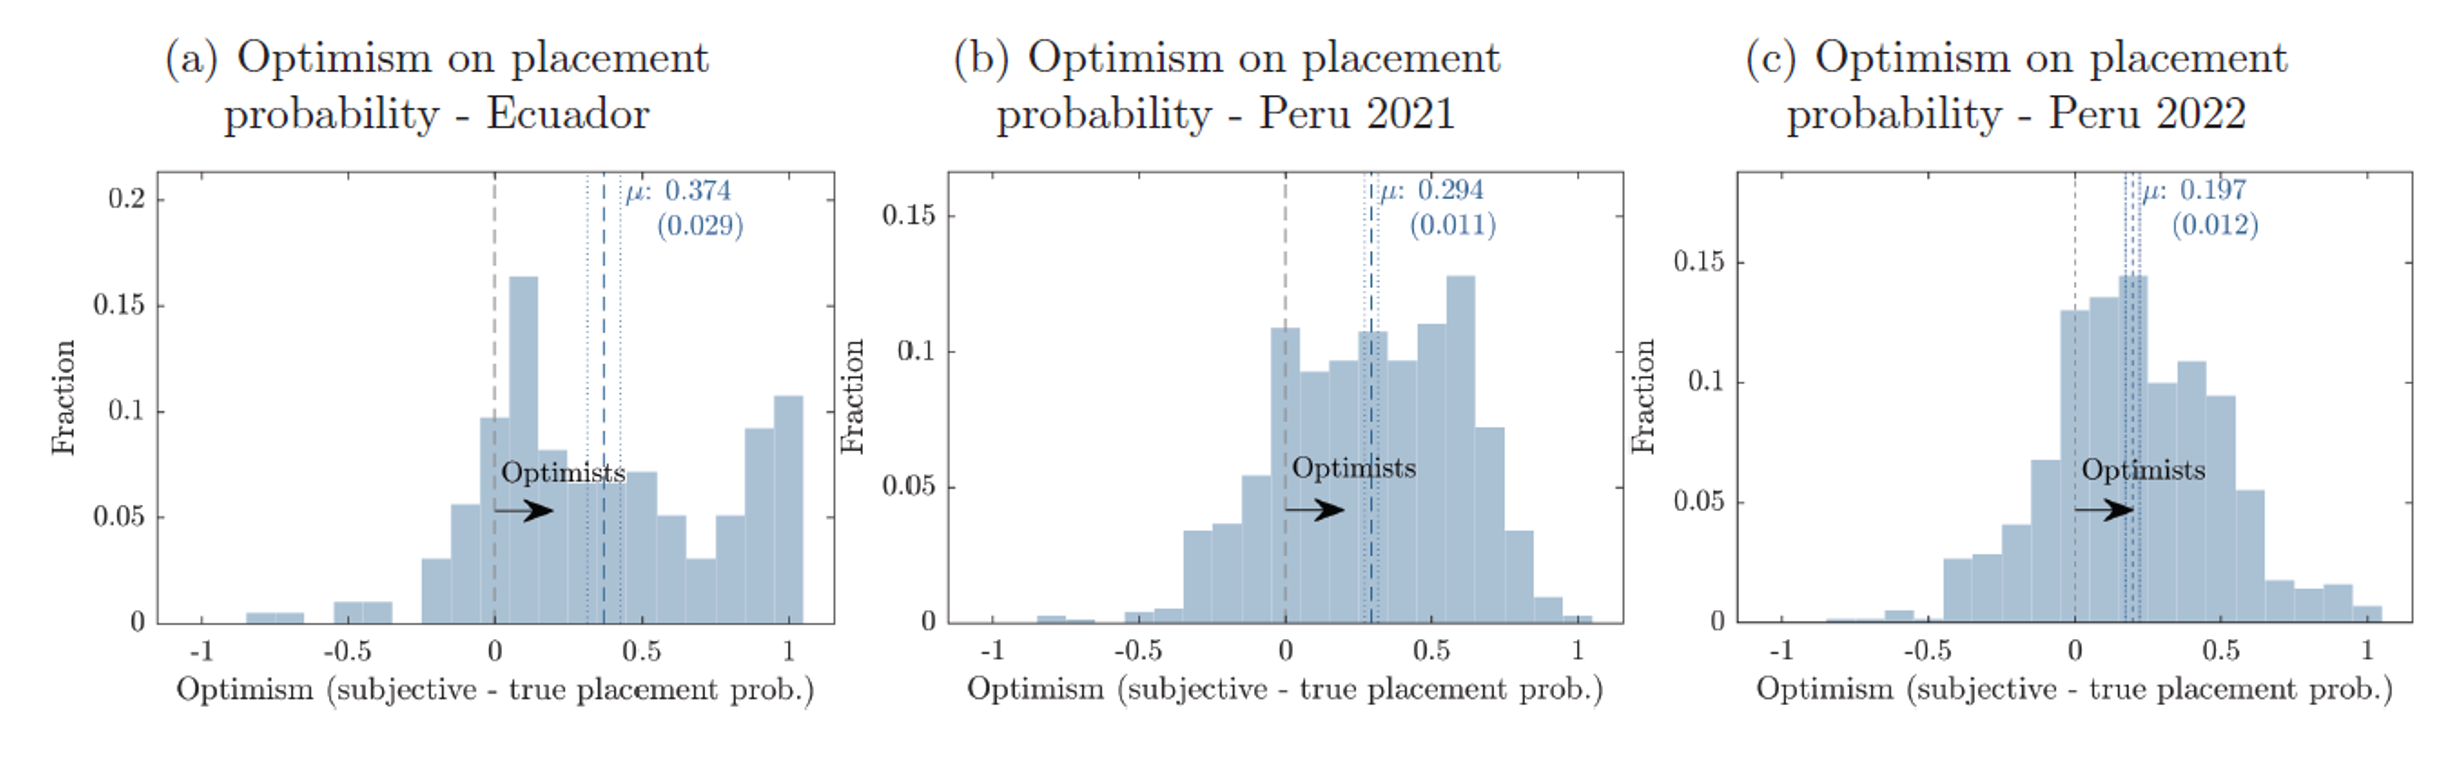 Optimism on Placement Probability